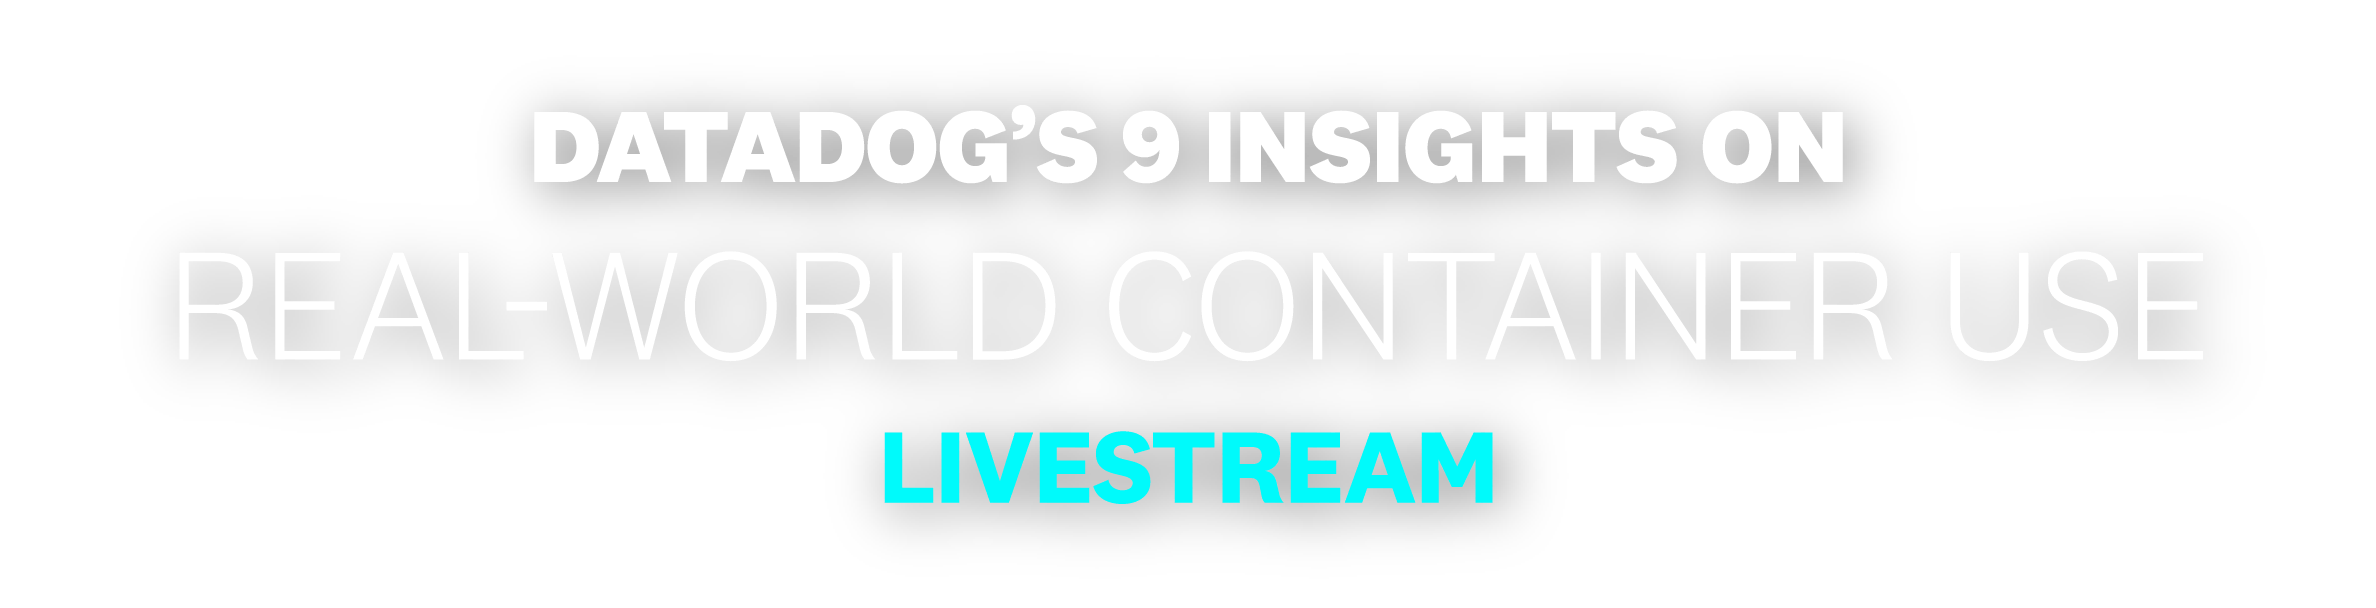 9 Insights on Real-World Container Use Livestream header image